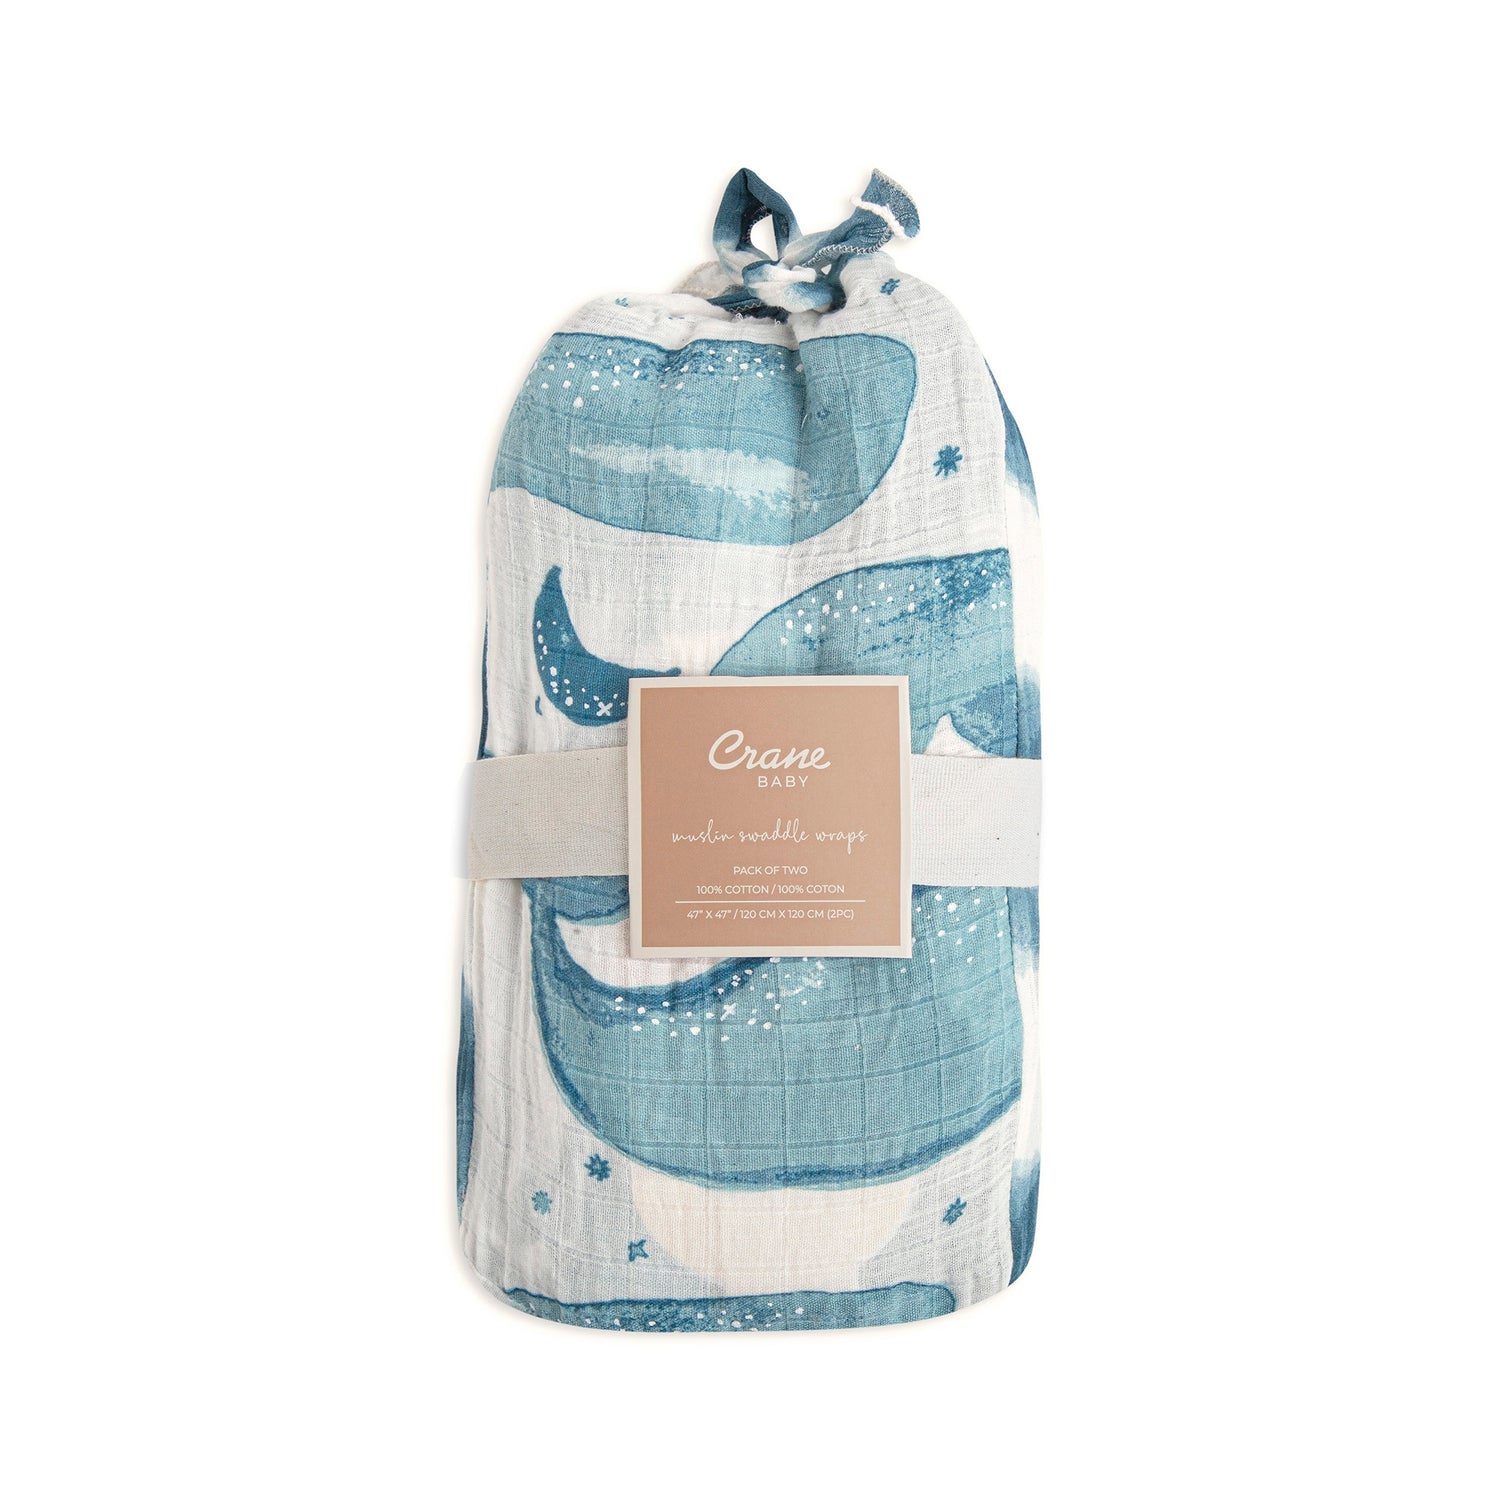 Caspian swaddle set of two by crane baby, made with 100% cotton muslin